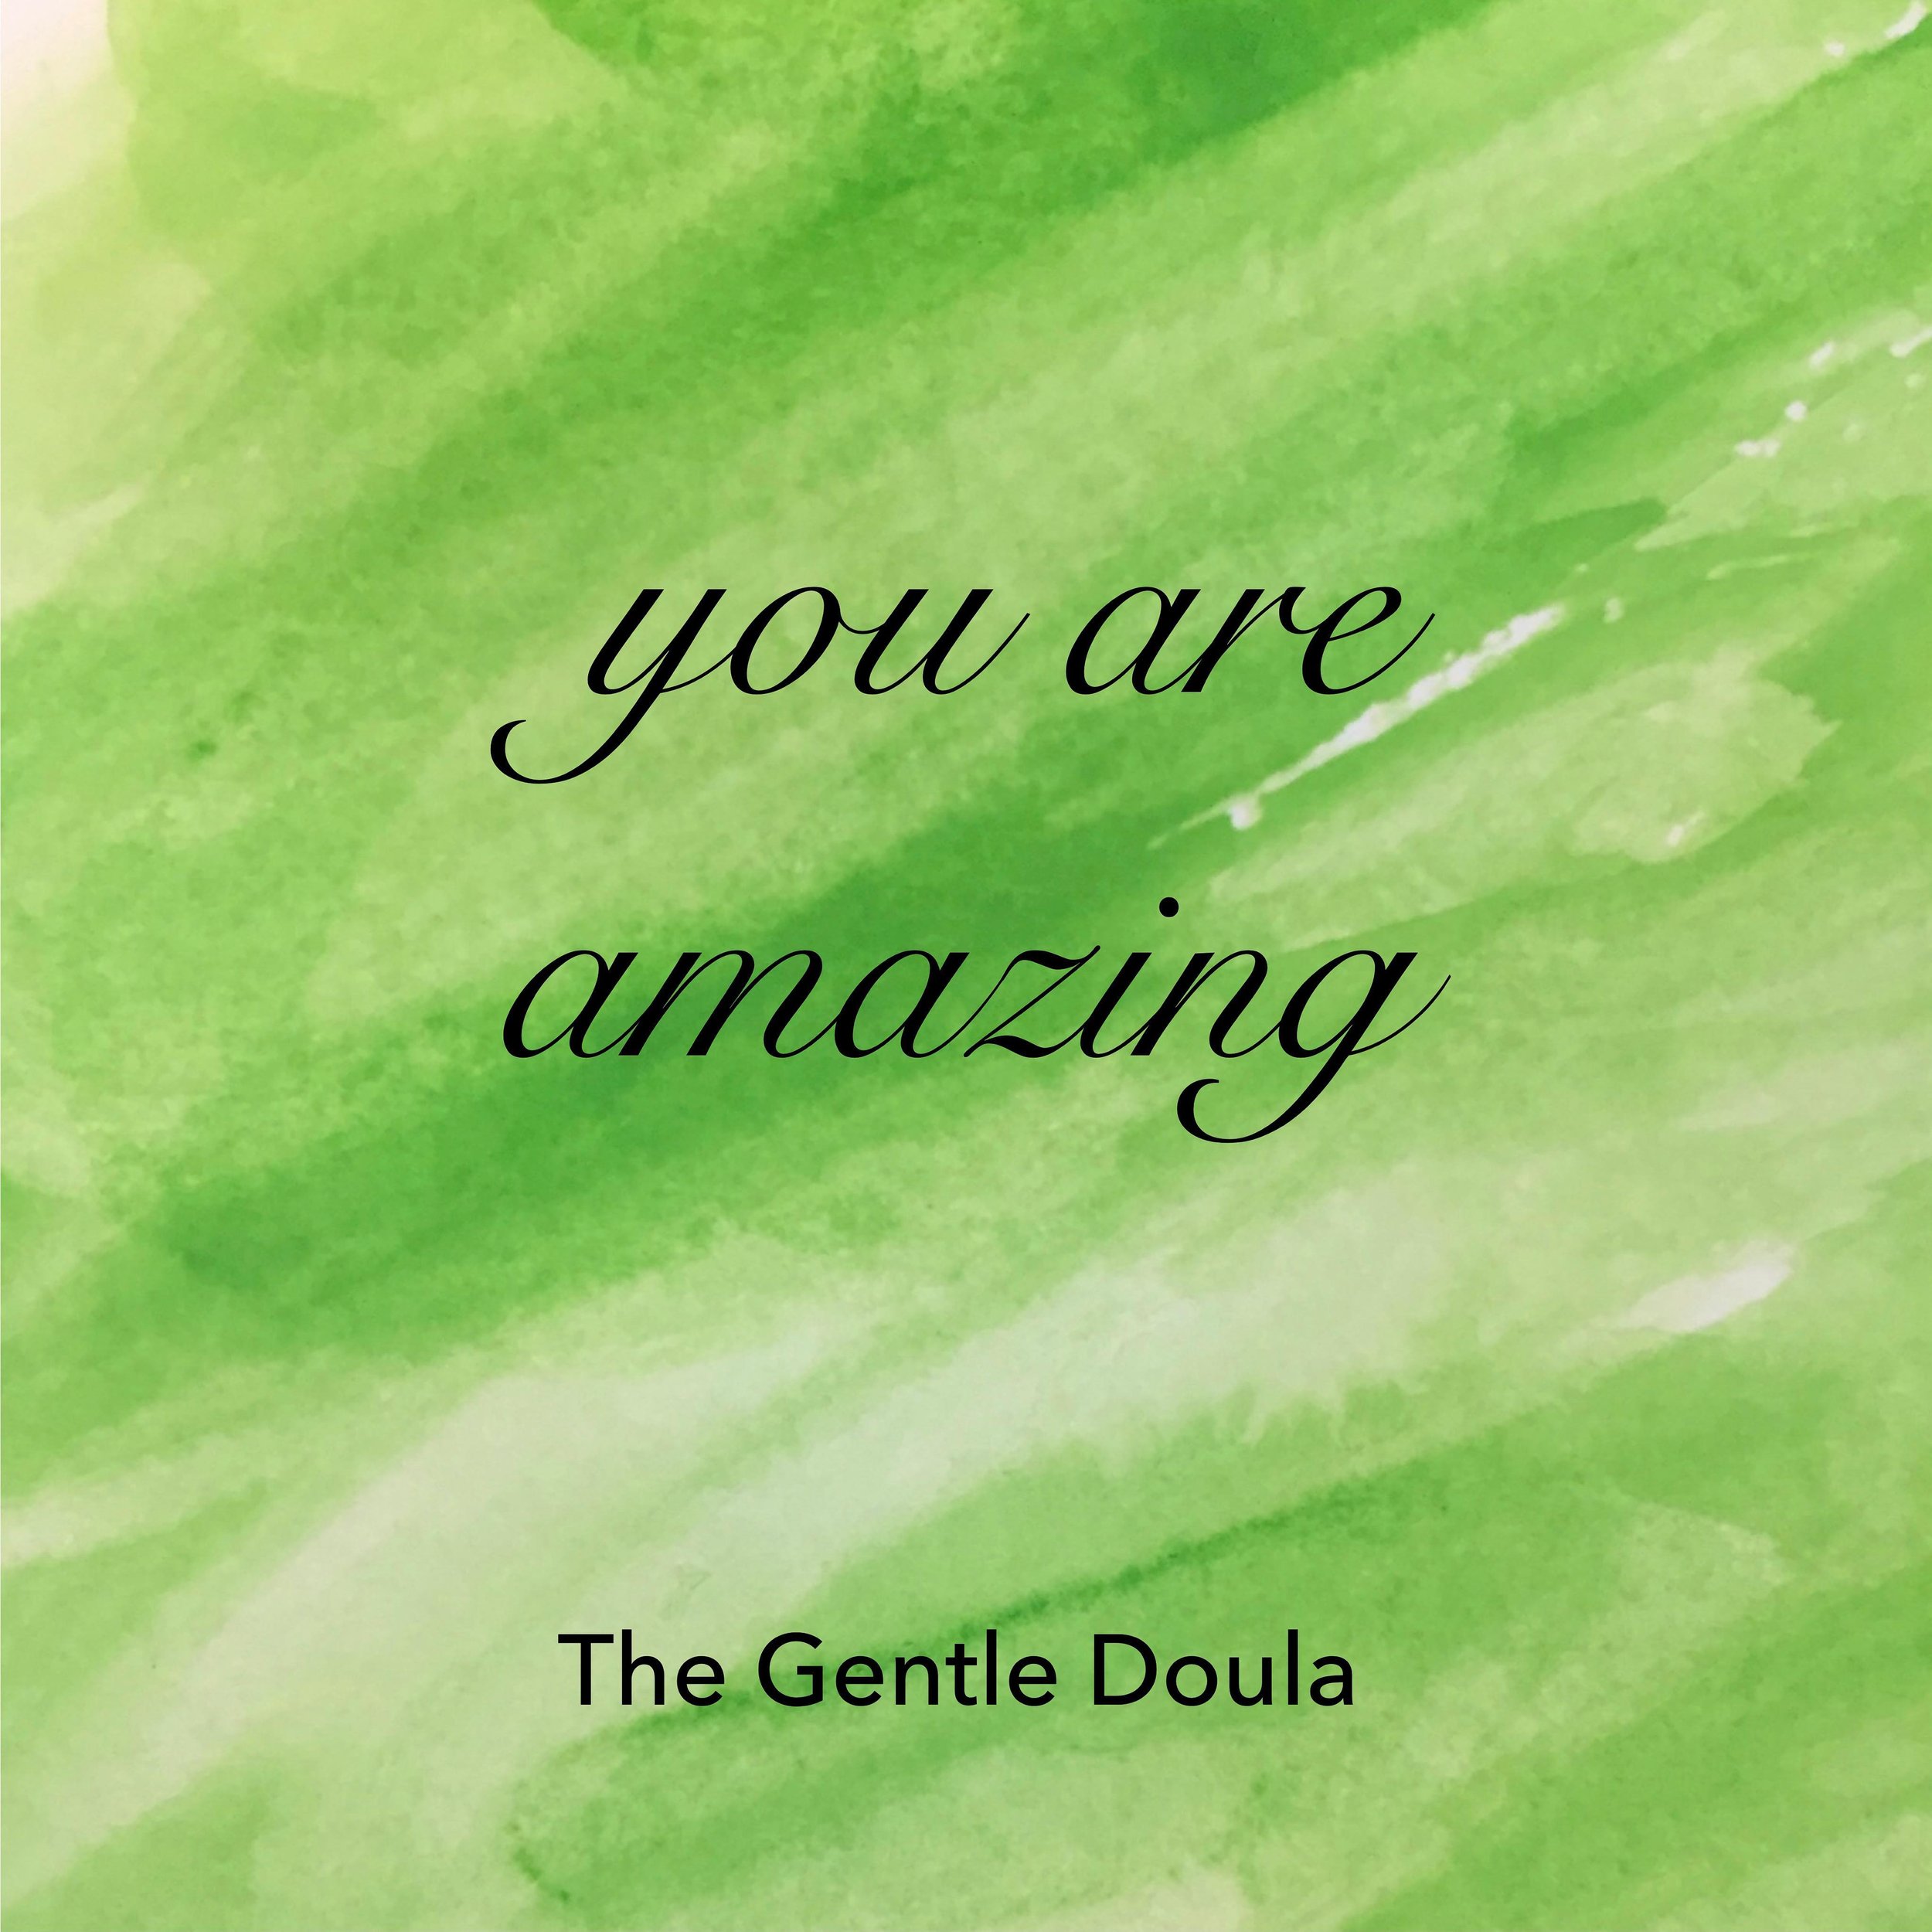 You! You are amazing! 
.
Did you know that your body knows how to give birth? How amazing is that! 
.
And a doula can be right there with you to remind you of your beauty and worth&hellip; to help you feel more calm, confident and capable&hellip; to 